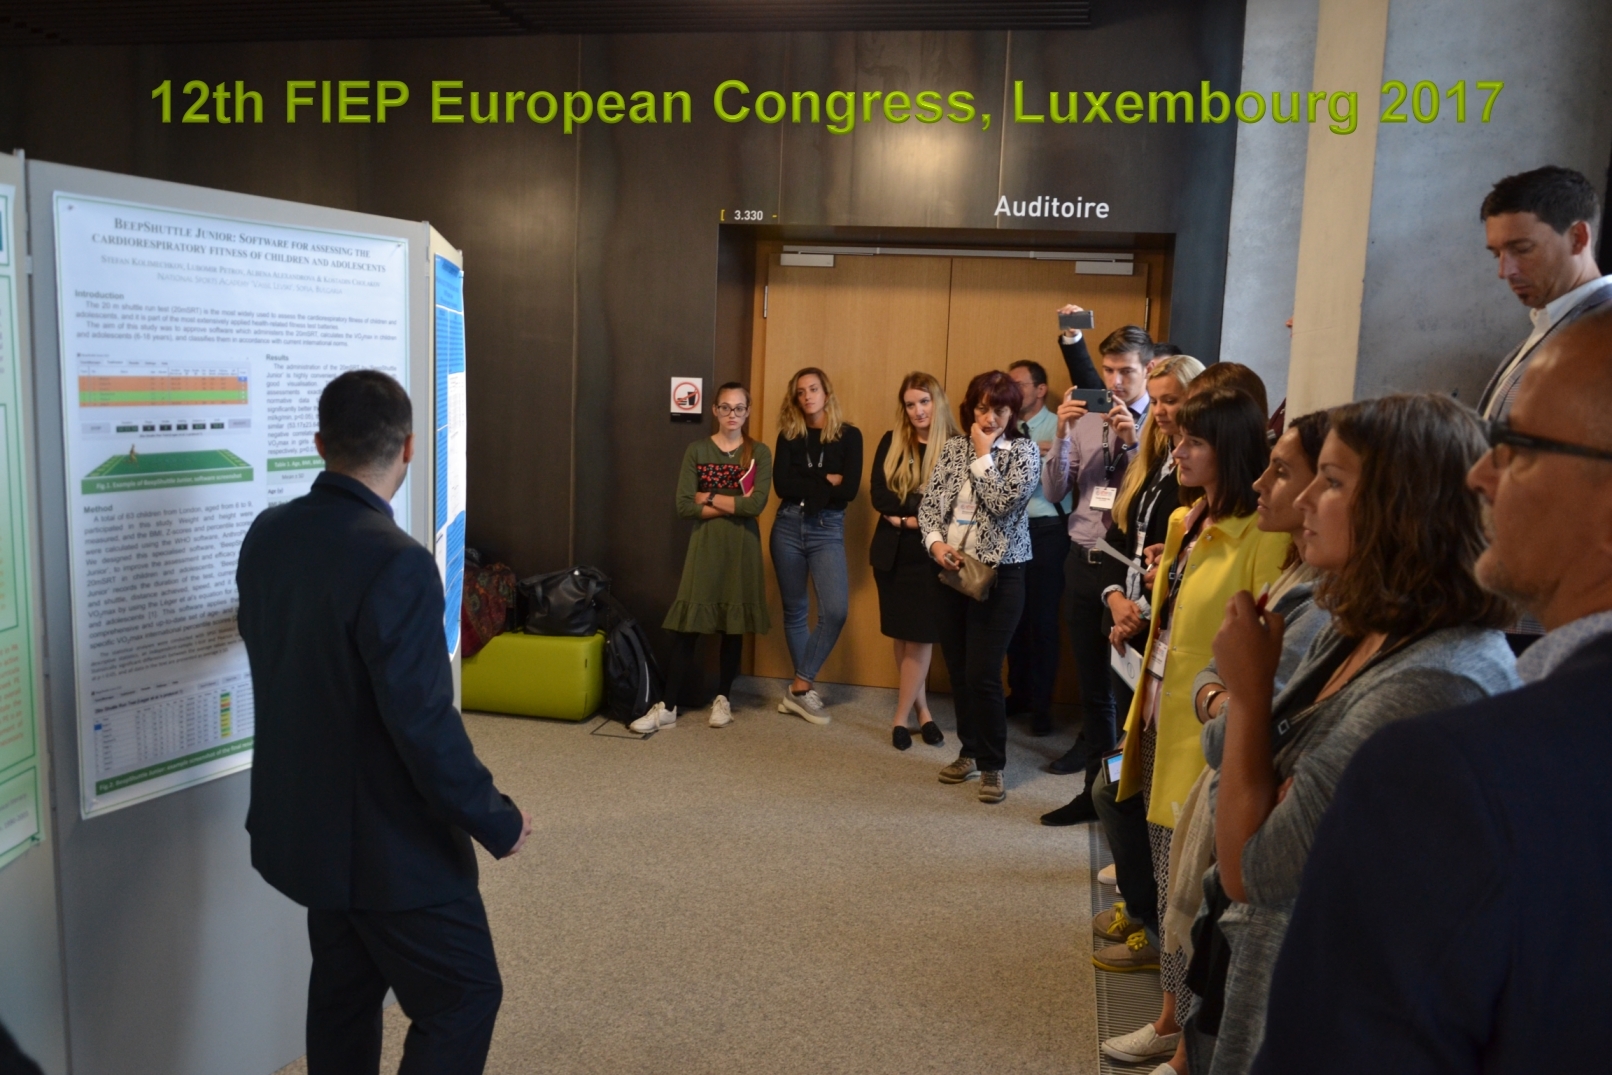 Beep Shuttle Junior was presented at the 12th FIEP European Congress in Luxembourg